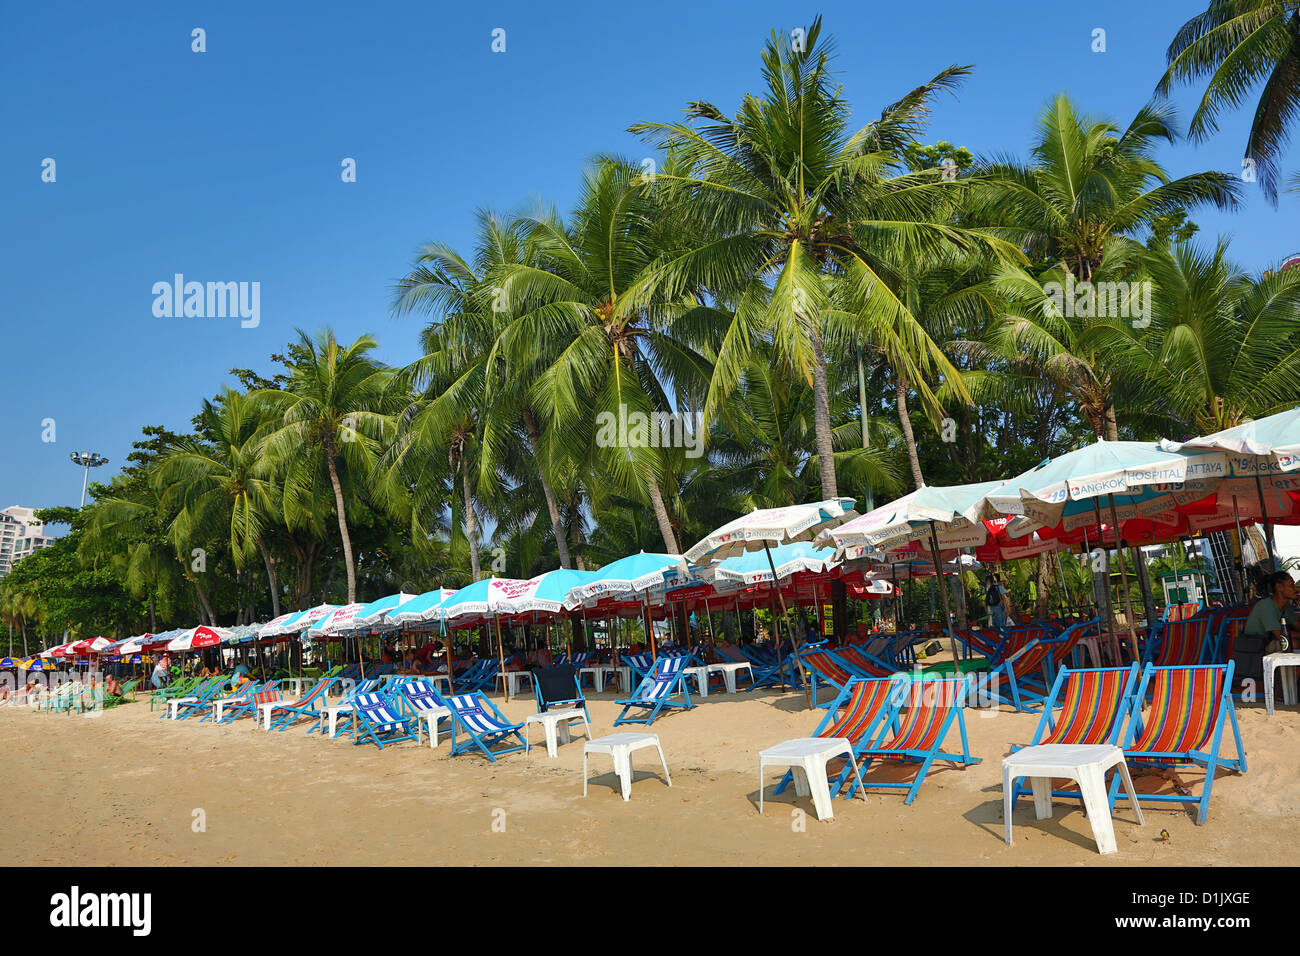 Beach scene with umbrellas on the seafront of Pattaya, Thailand Stock Photo